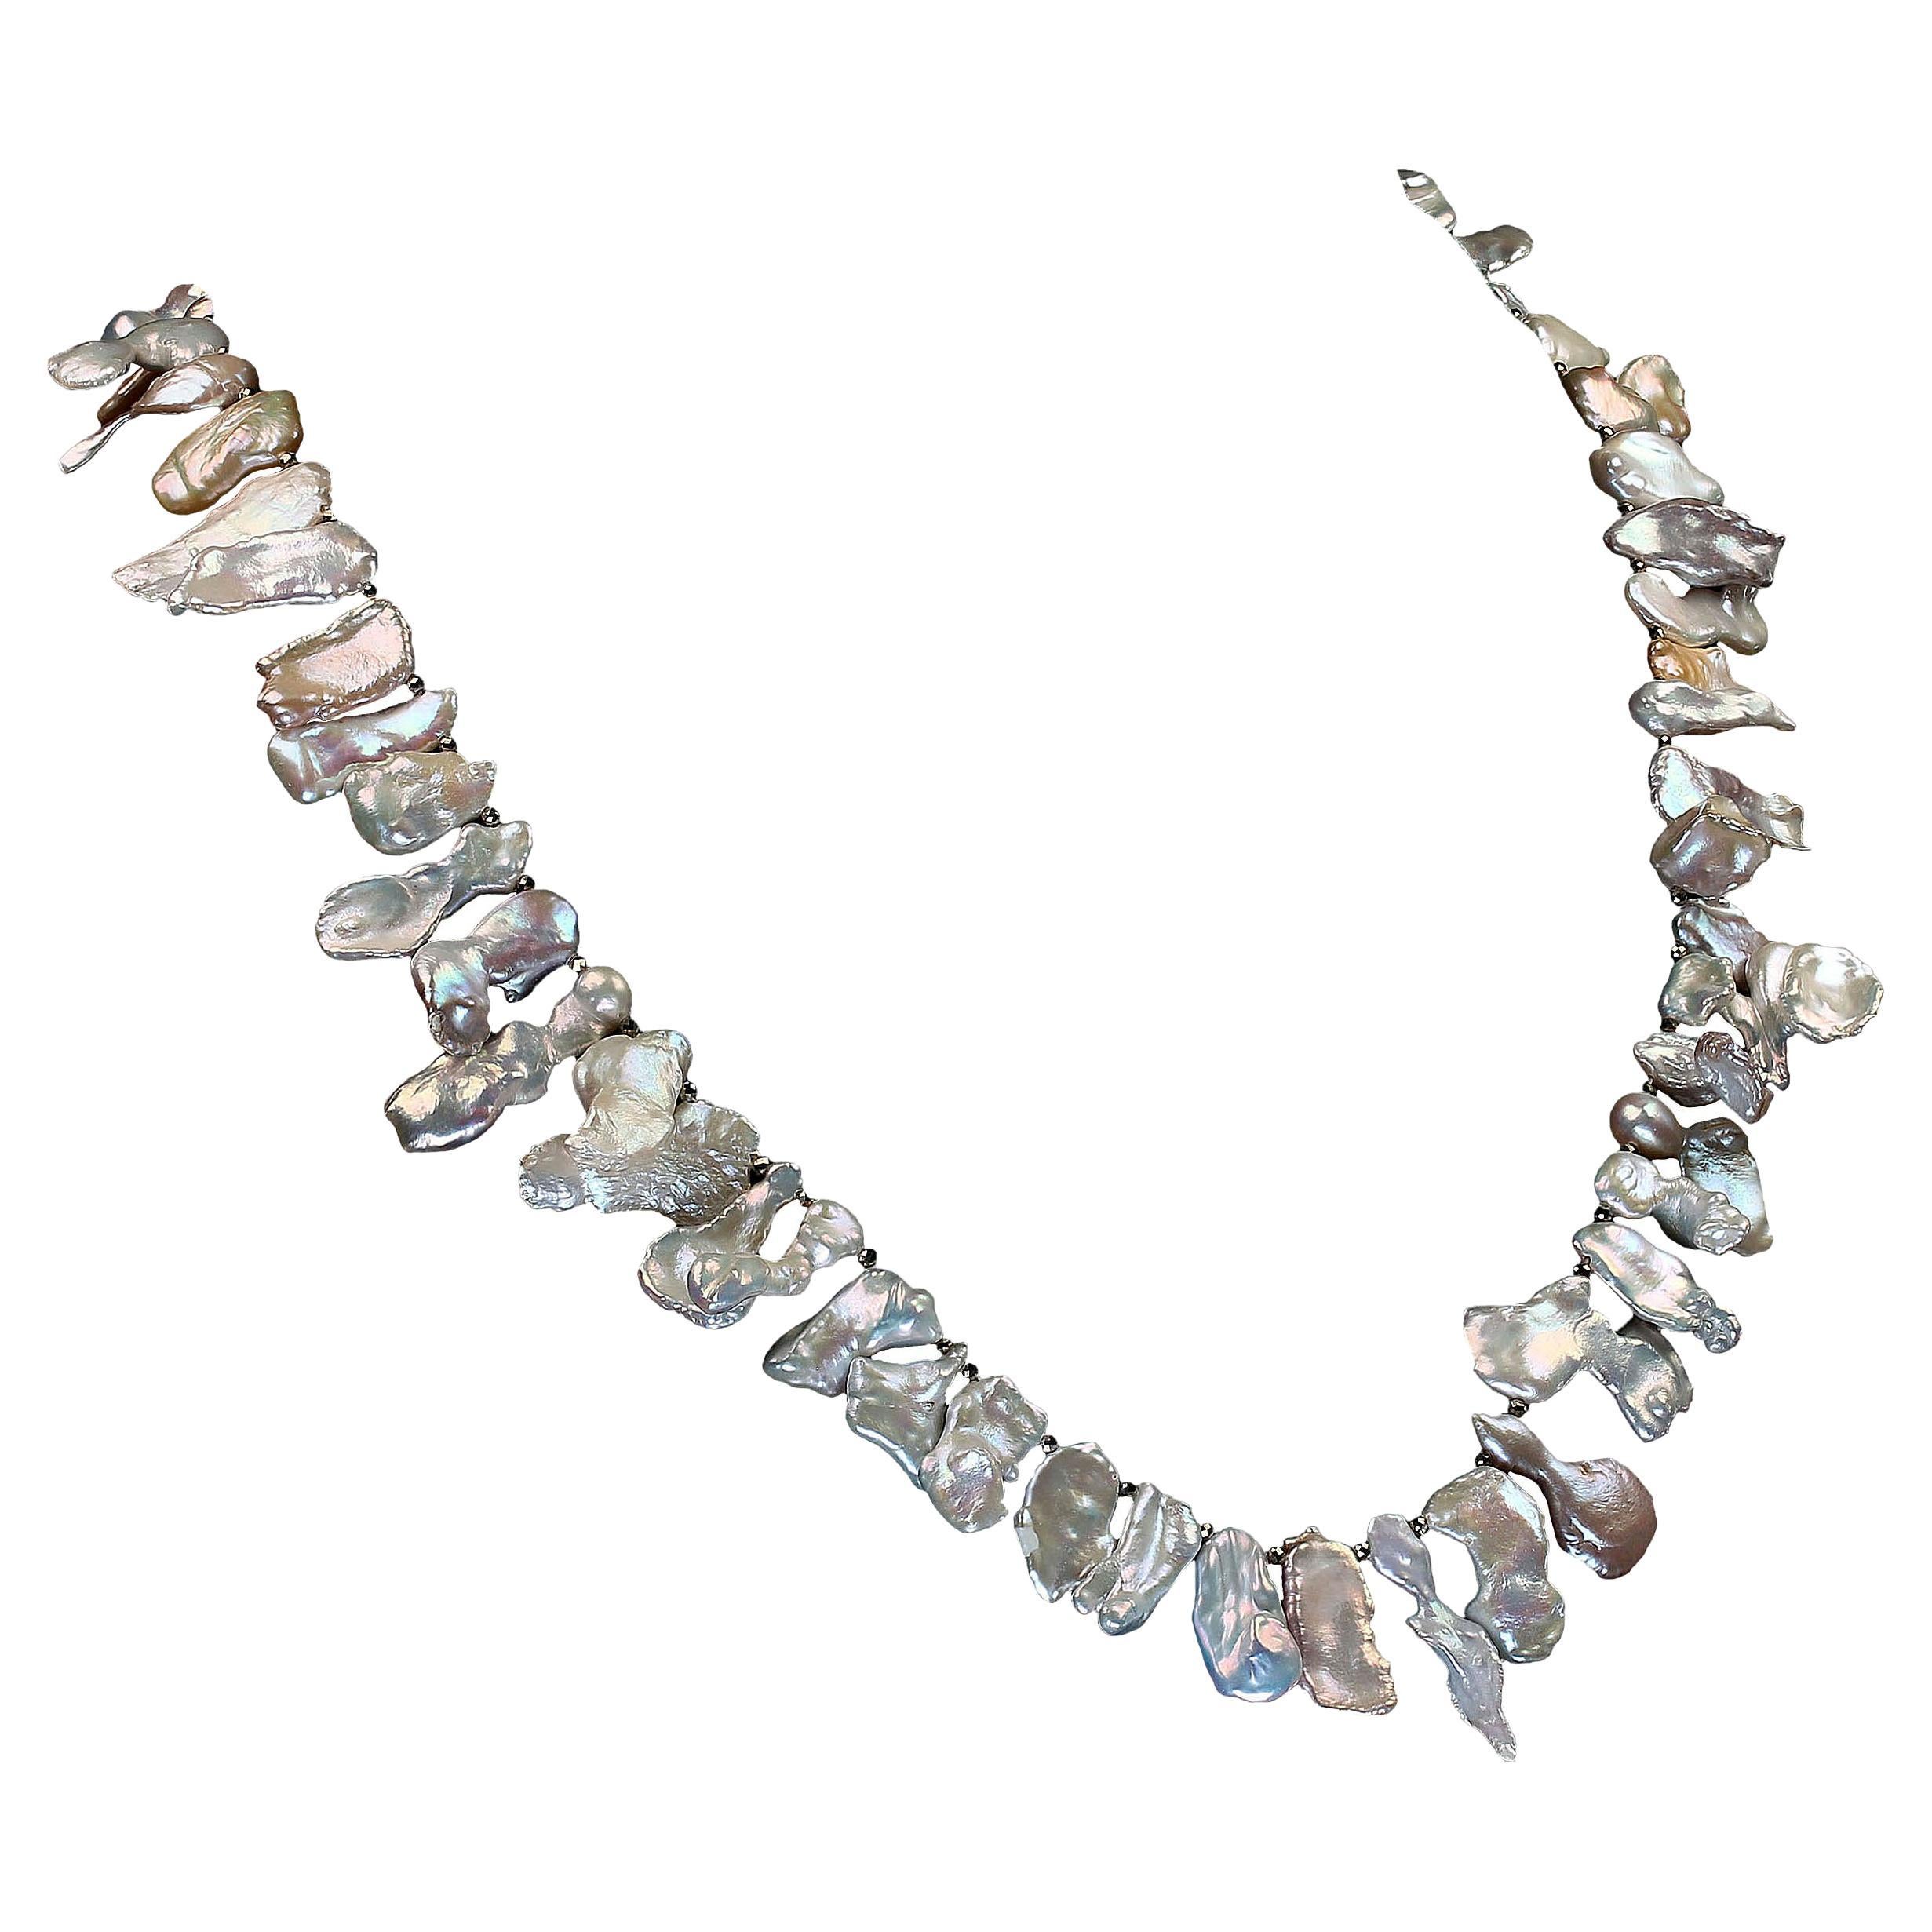 AJD Freeform, Iridescent Pearls Necklace Pyrite accents   Fabulous Gift!!!